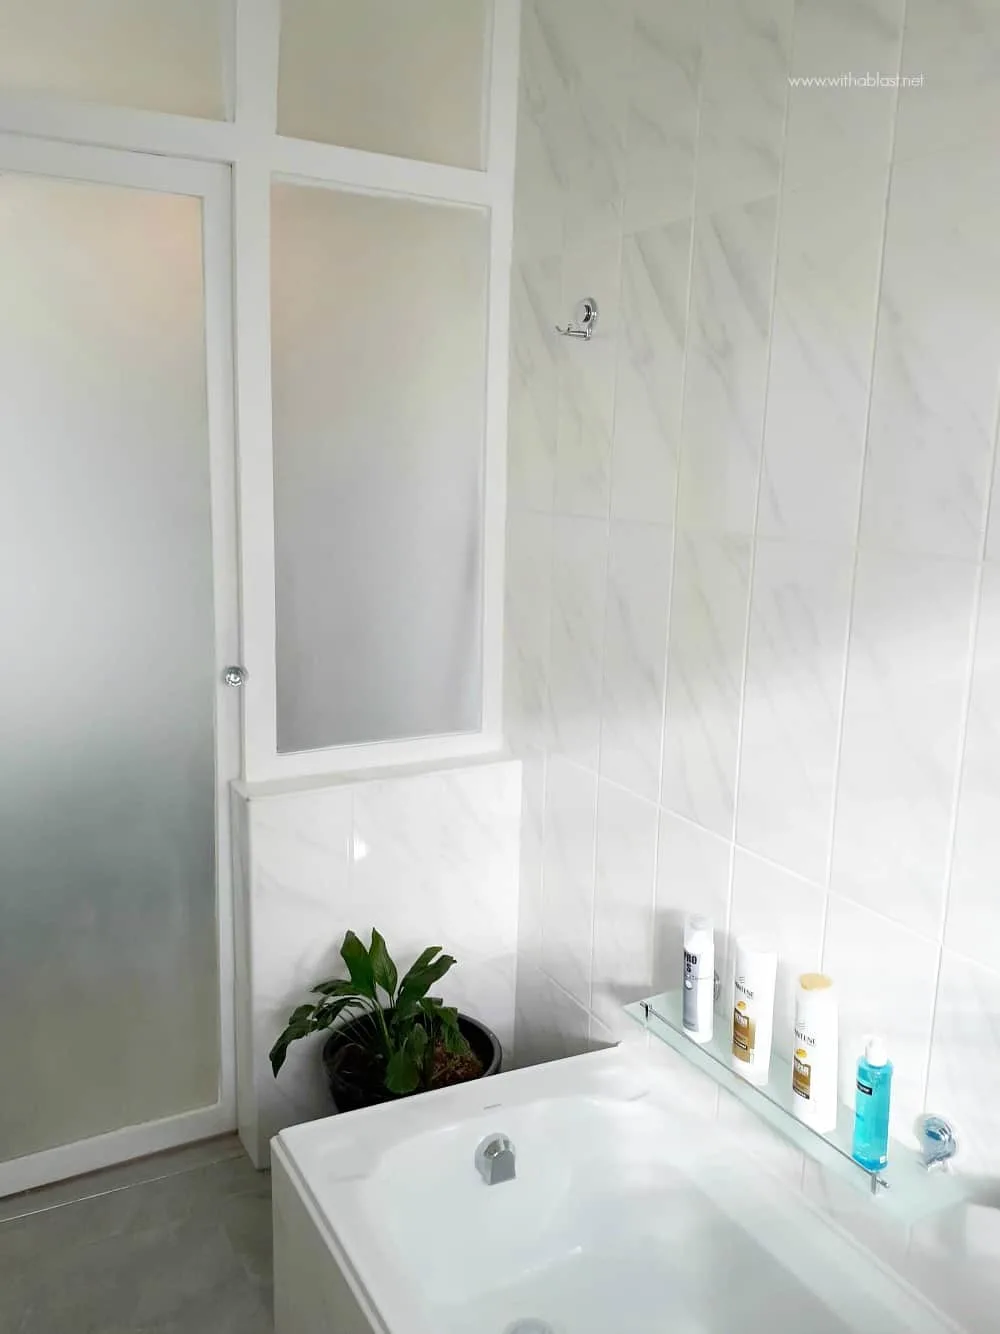 Bathroom Makeover with sand blasted wall window and door